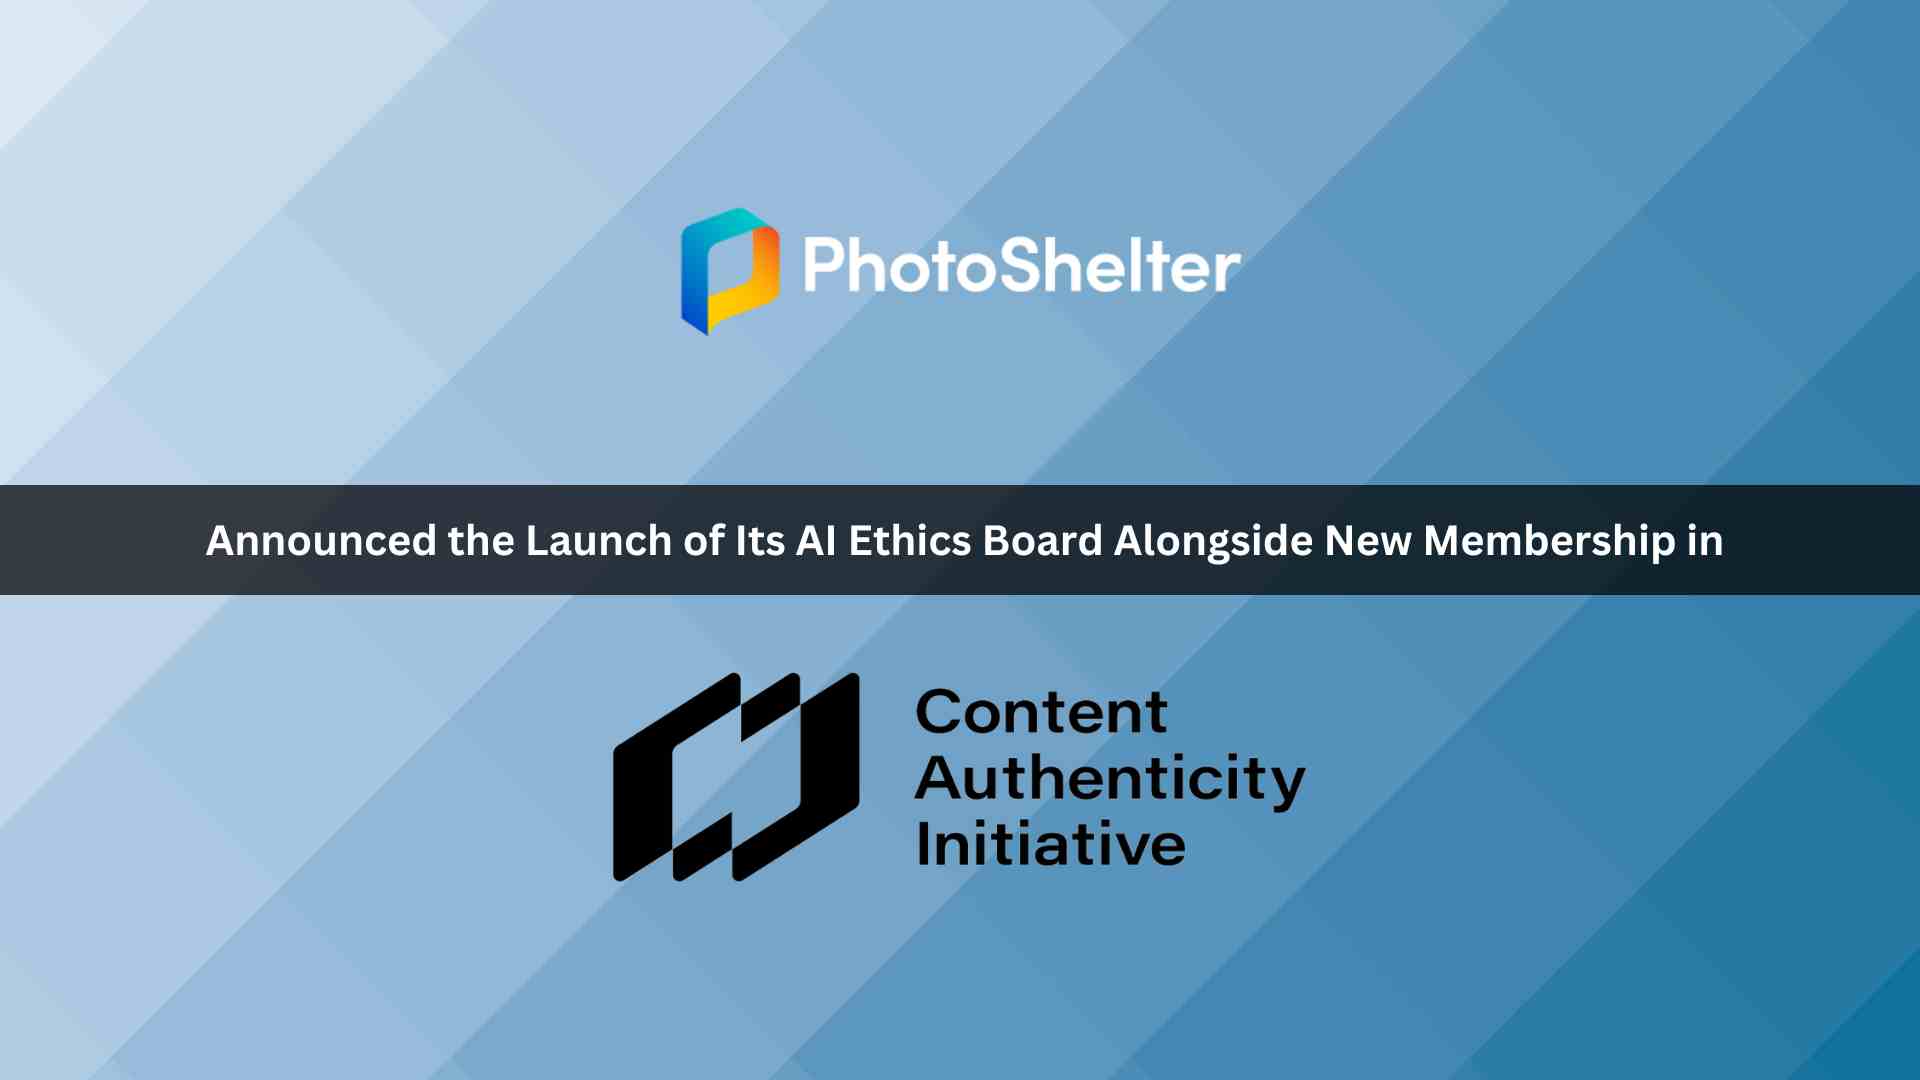 PhotoShelter Doubles Down on Ethical AI: Launches Ethics Board, Joins the Content Authenticity Initiative